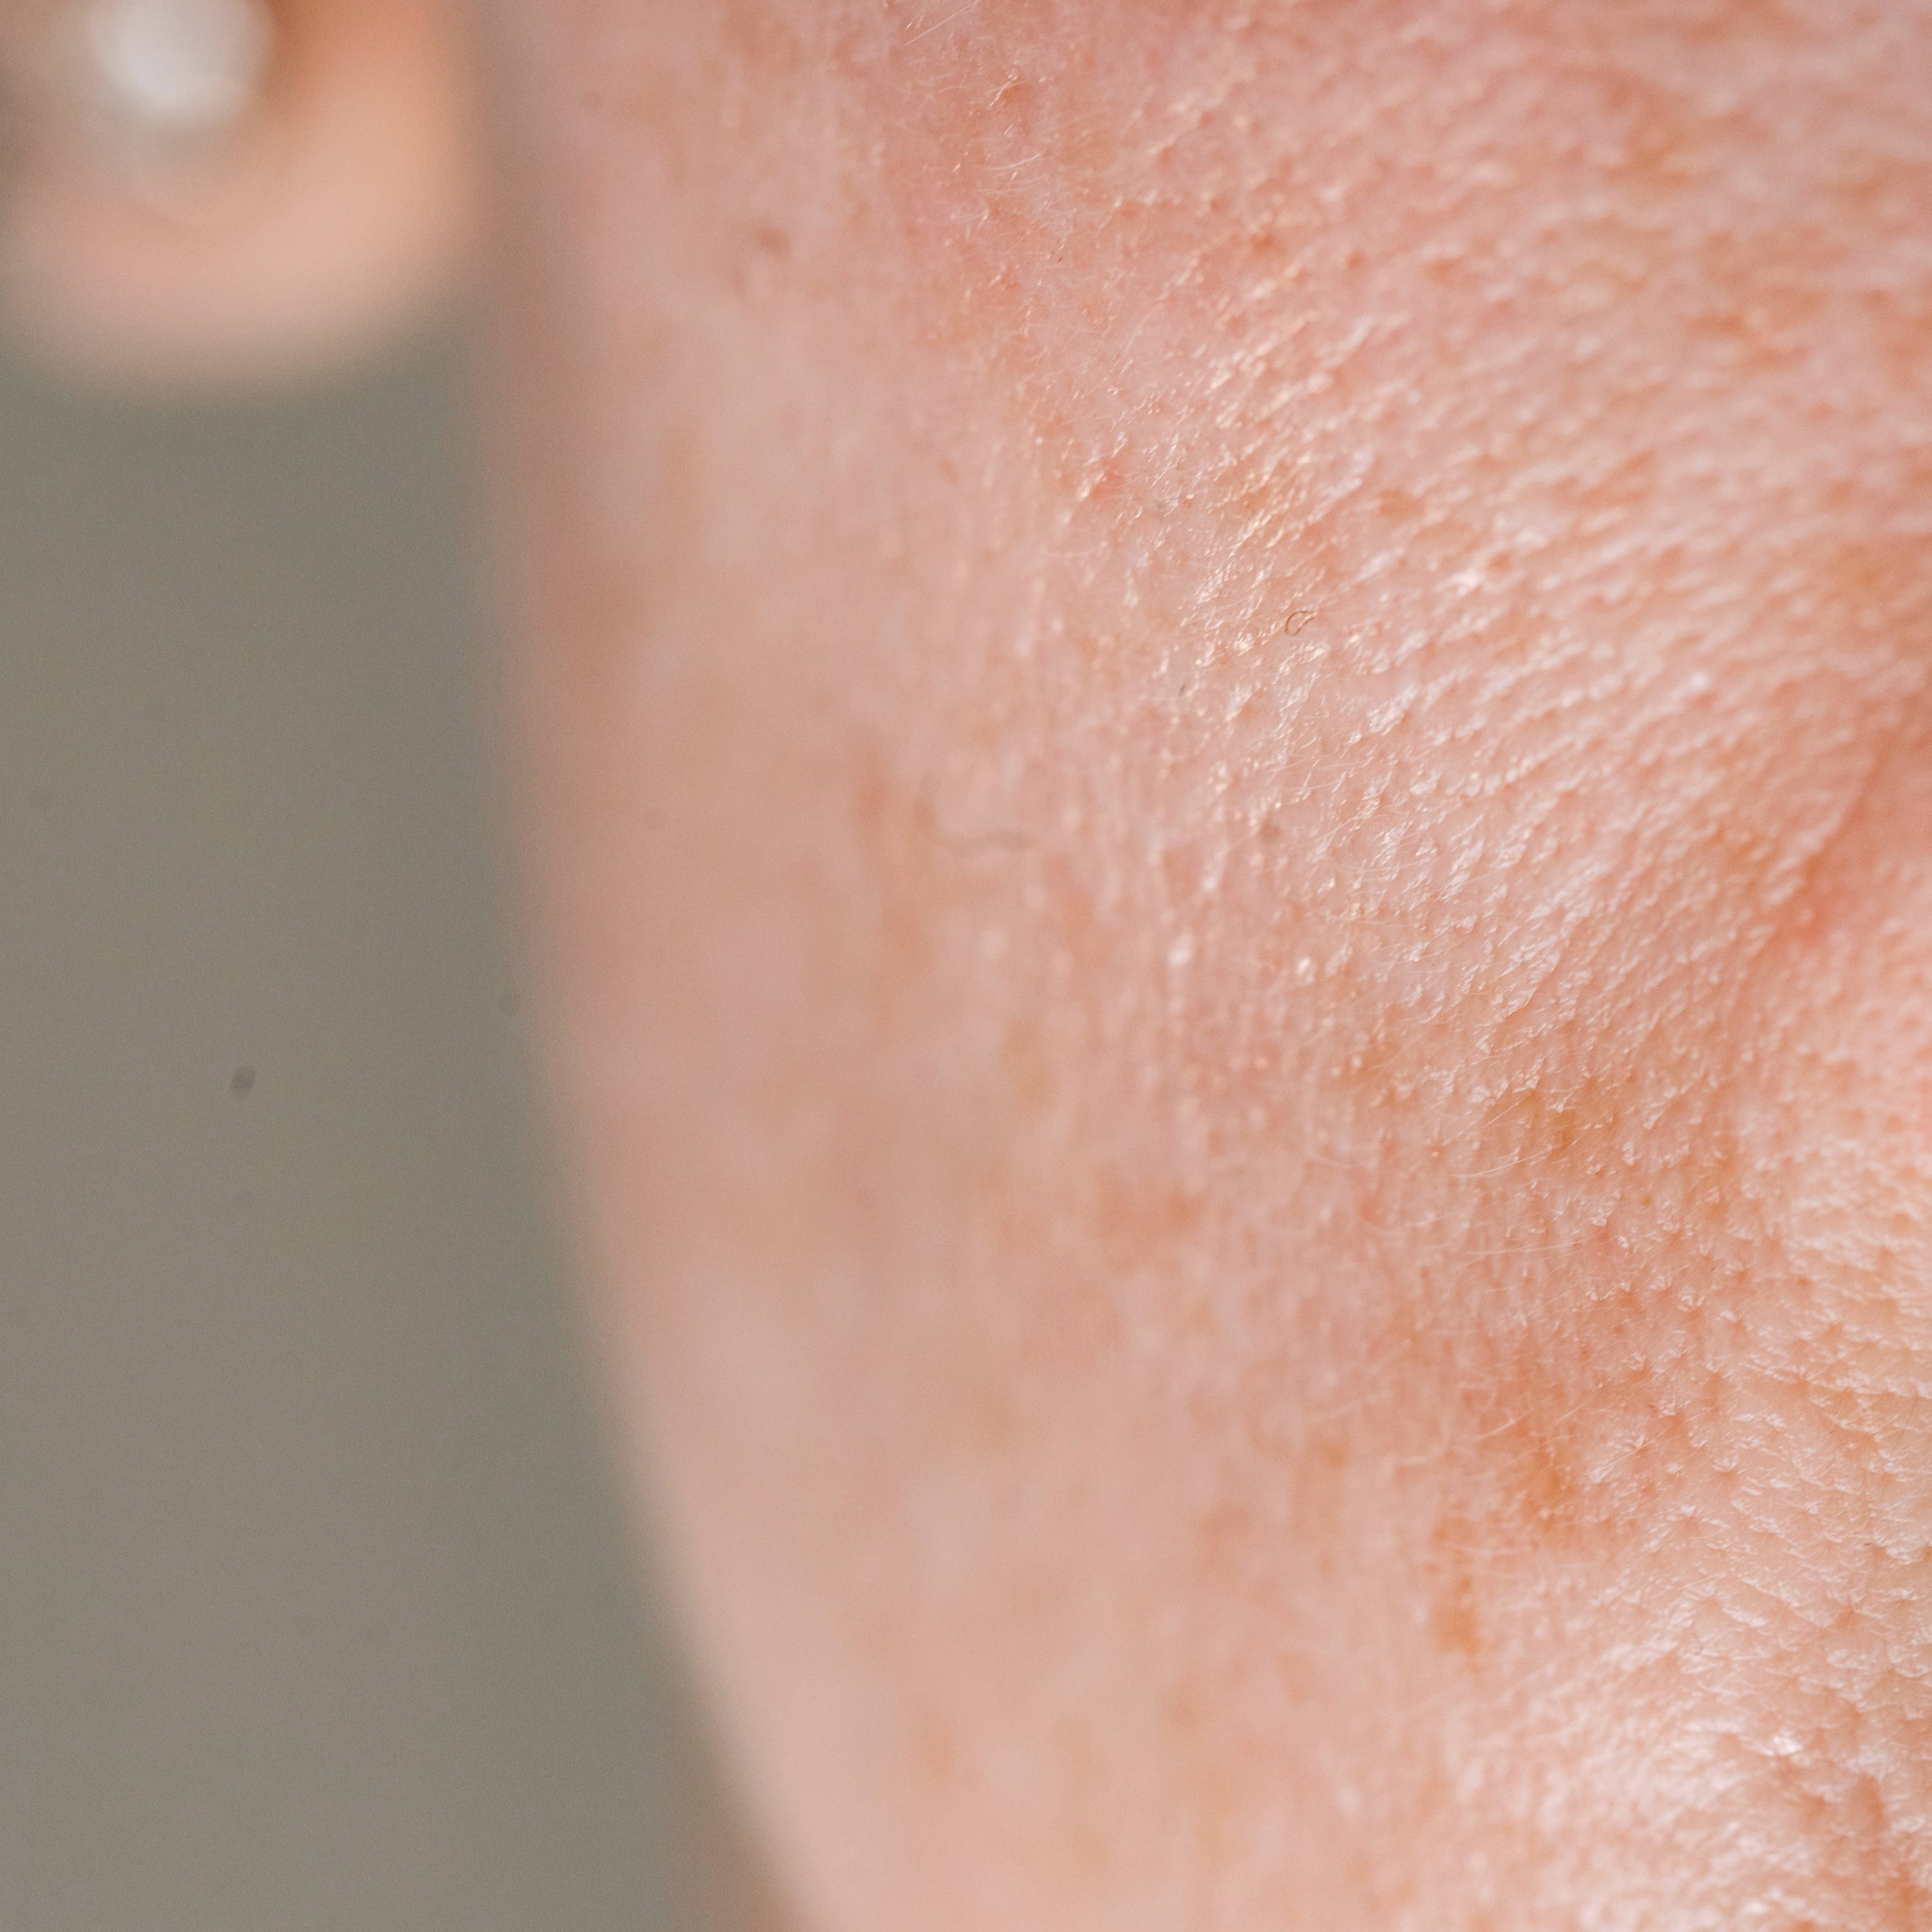 What causes enlarged pores?